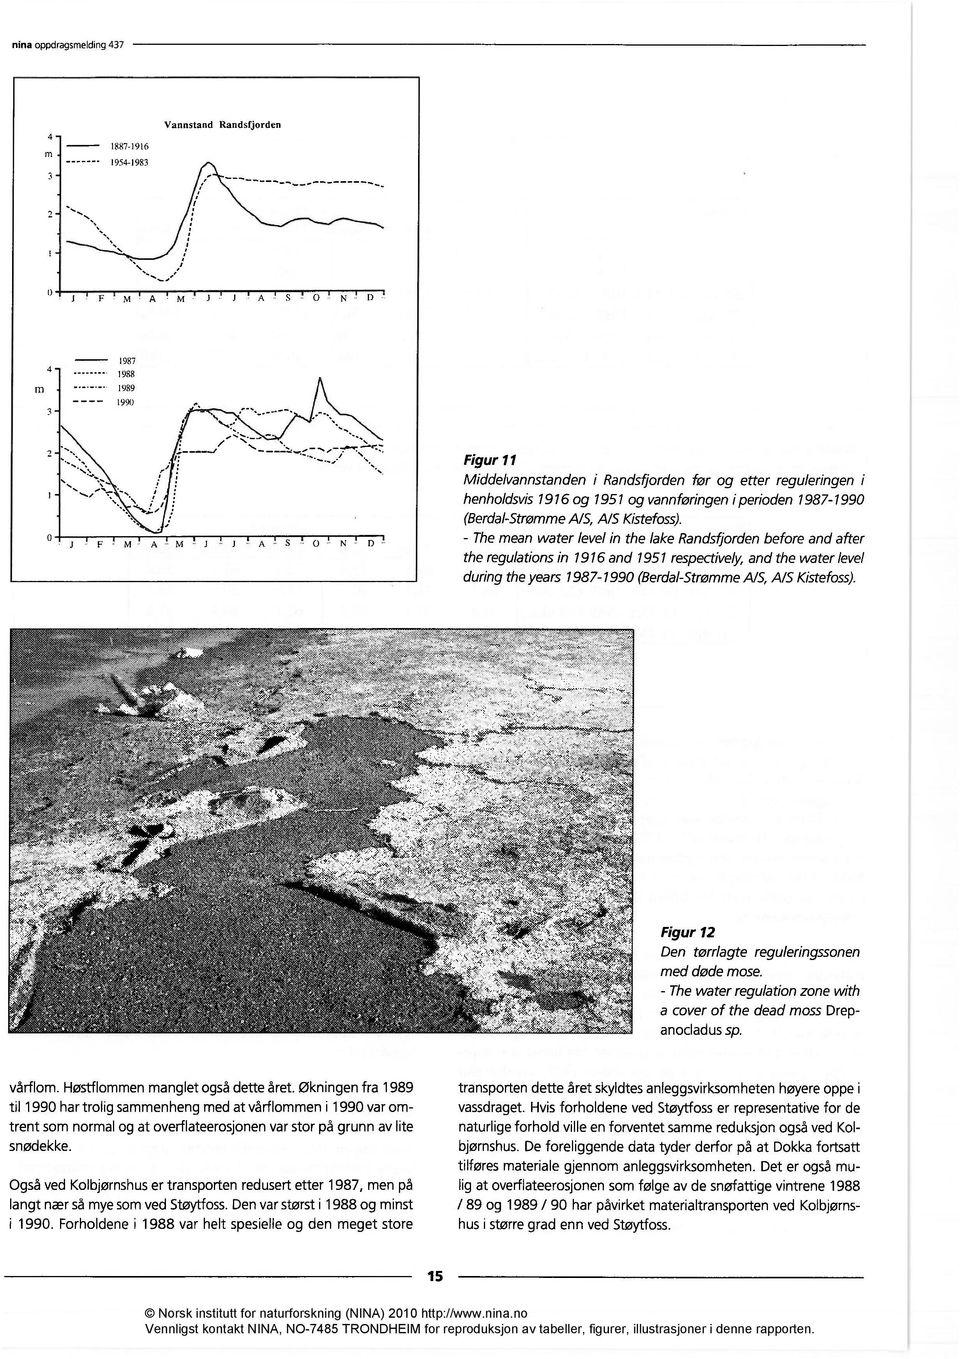 - The mean water level in the lake Randsfjorden before and after the regulations in 1916 and 1951 respectively, and the water level during the years 1987-1990 (Berdal-Strømme NS, A/S Kistefoss).